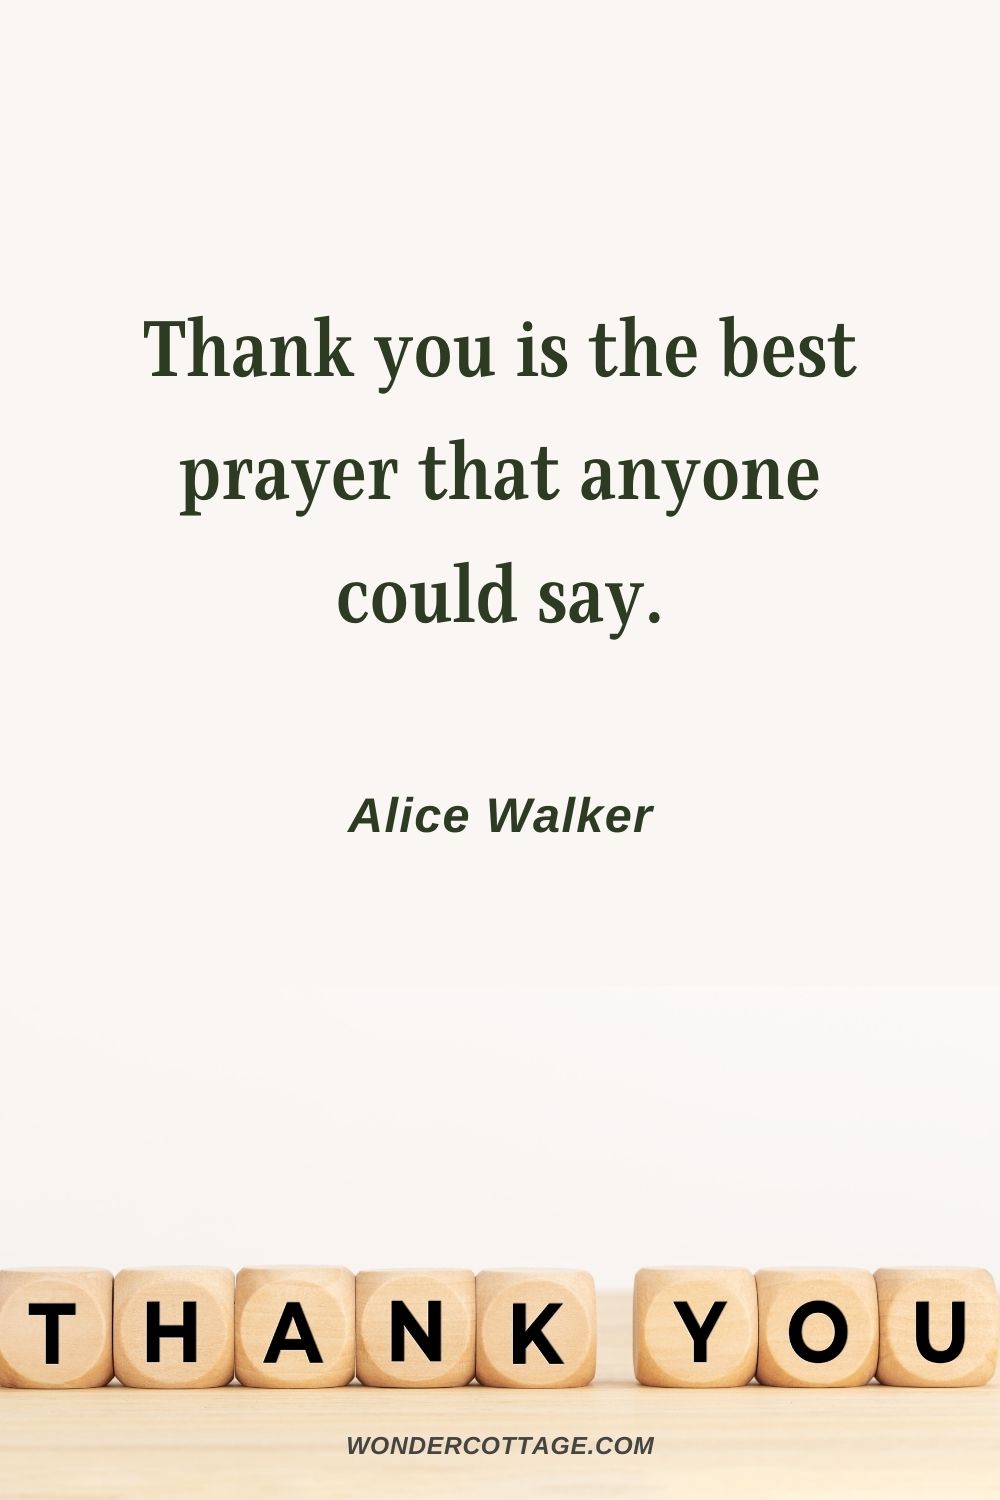 Thank you is the best prayer that anyone could say. Alice Walker